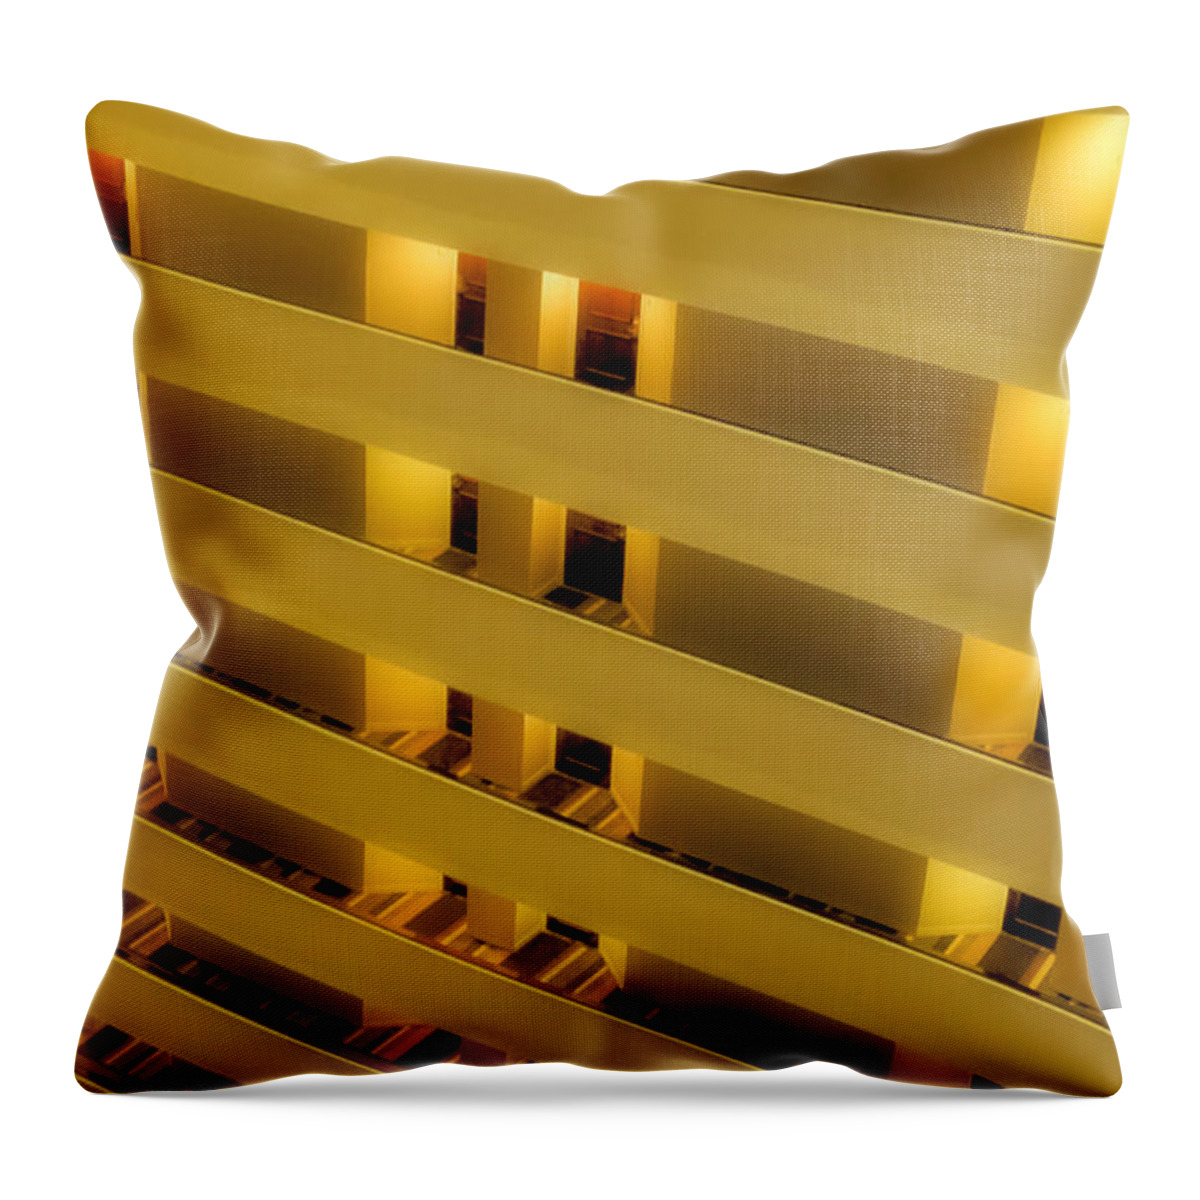 Hotel Throw Pillow featuring the photograph Hotel08 by Tony Grider